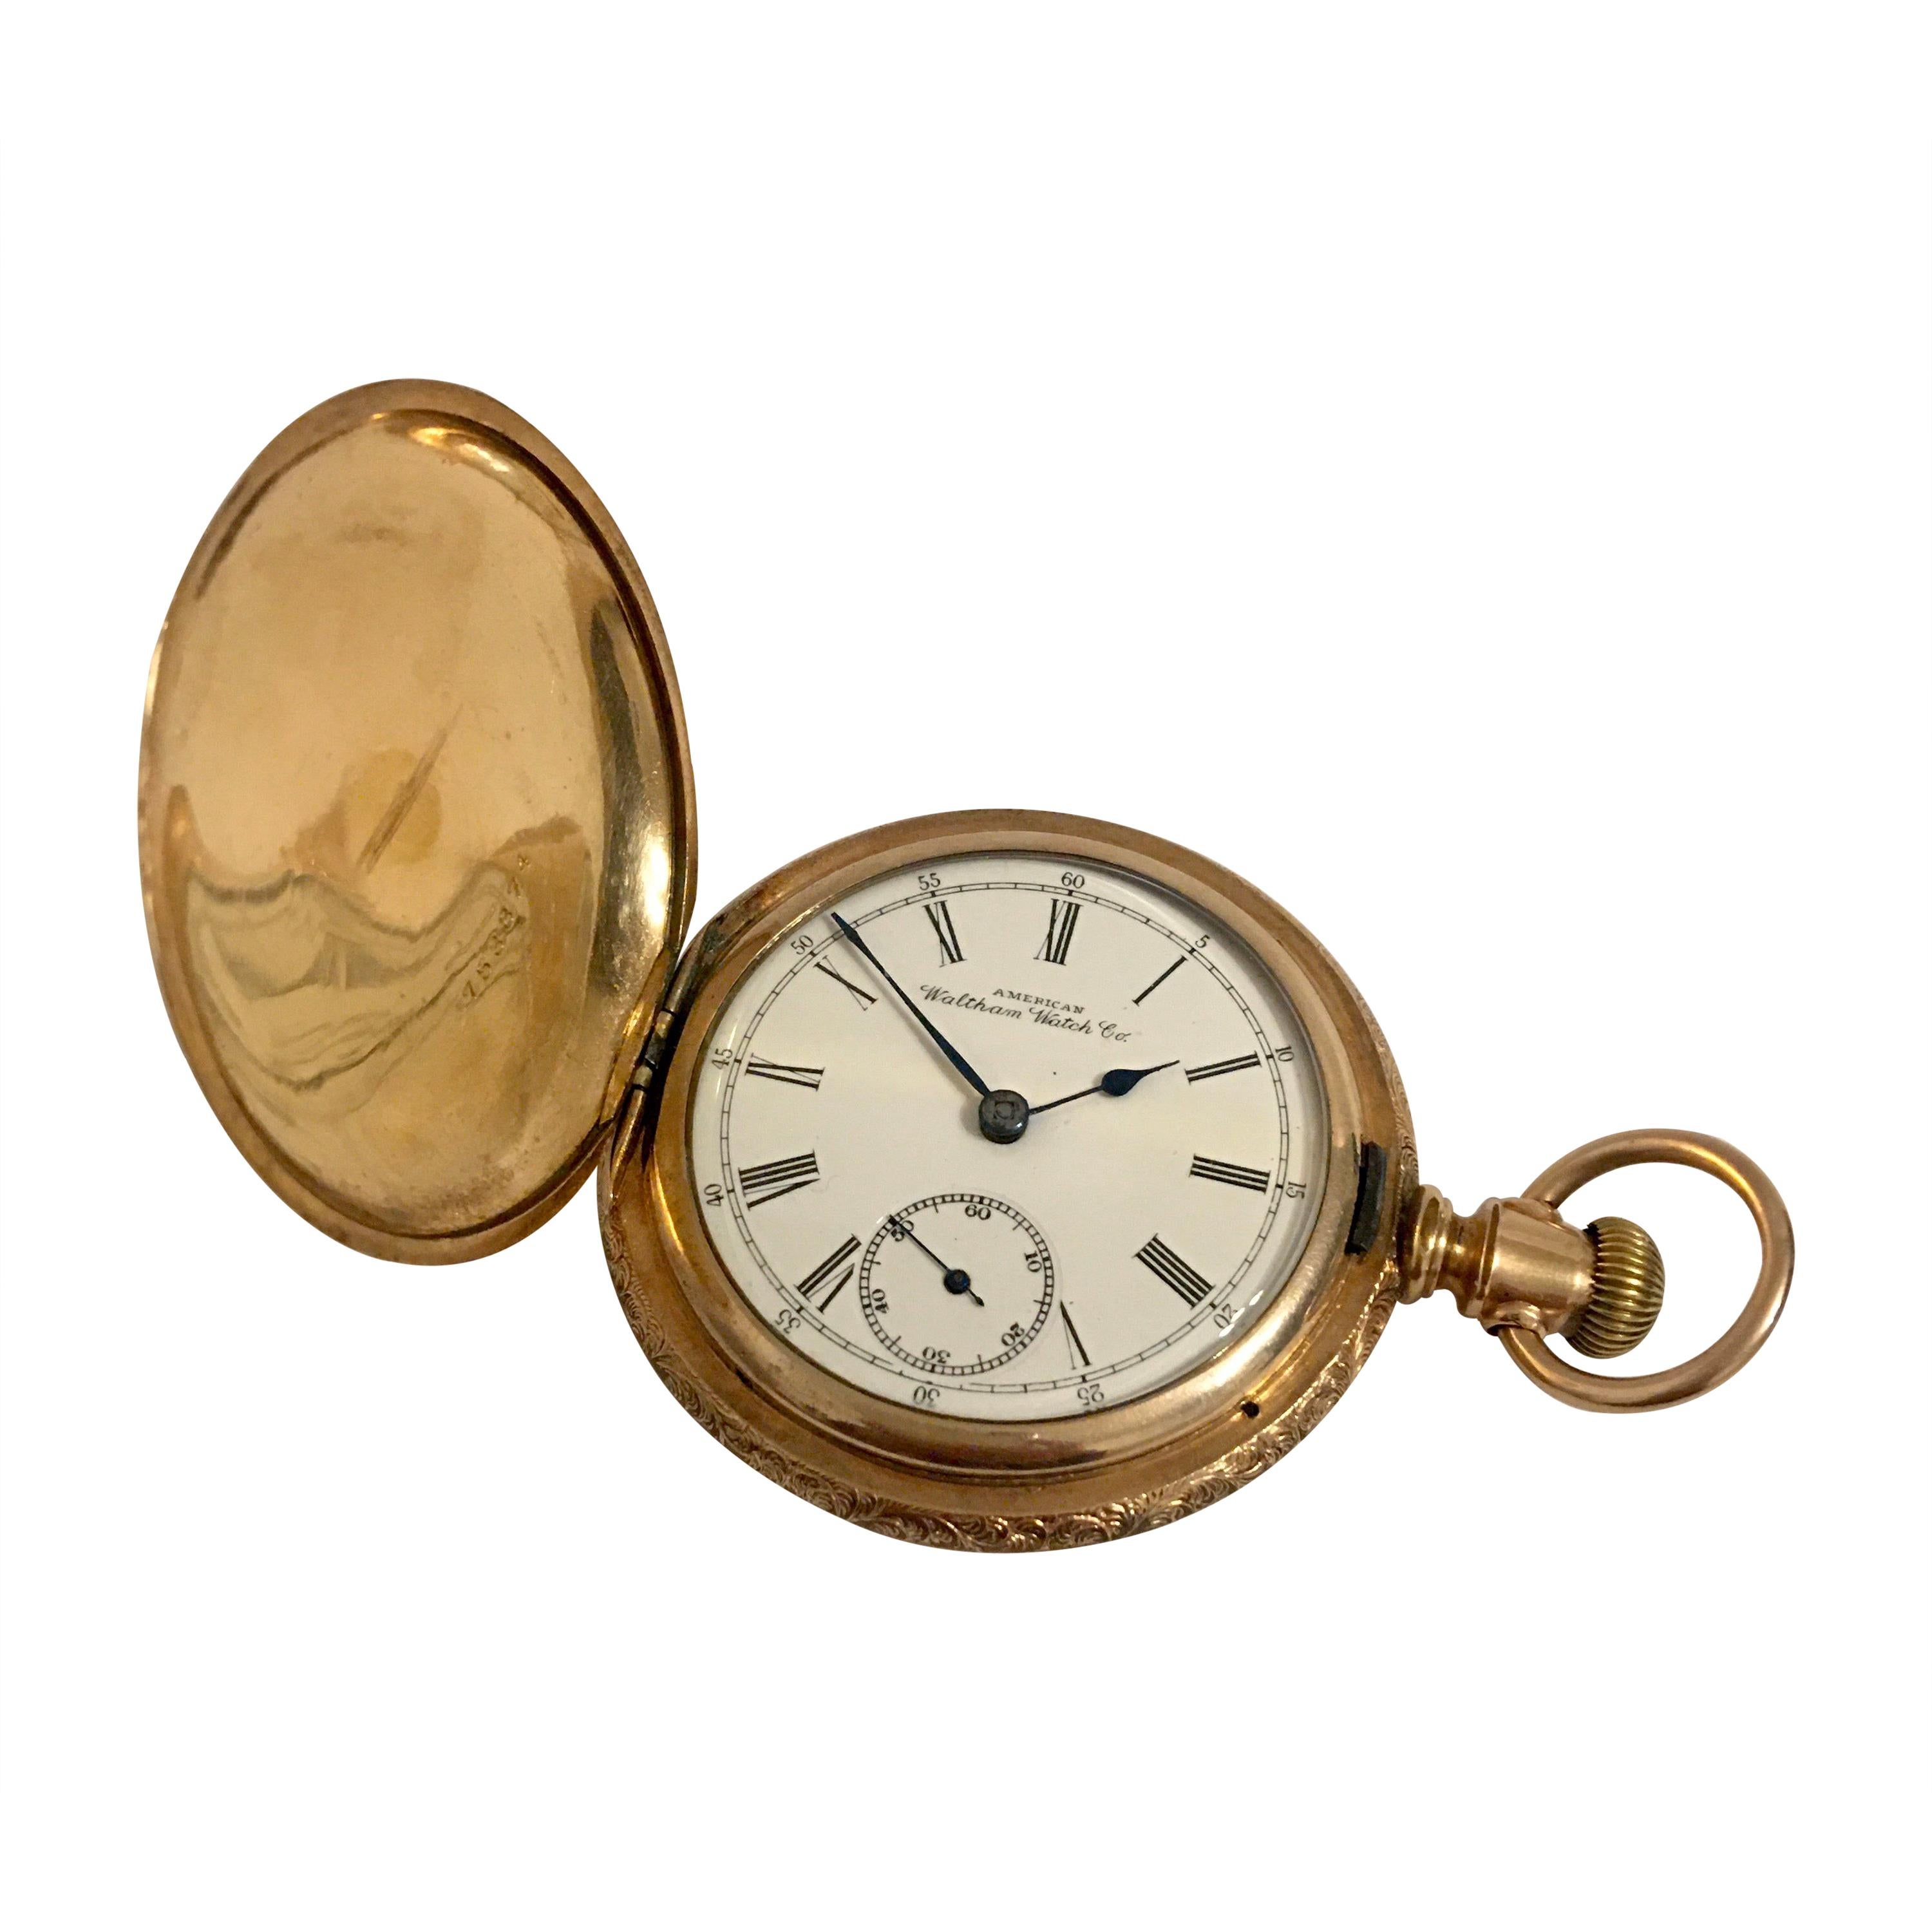 14K Gold-Filled Full Hunter American Waltham Watch Co.Antique Gents Pocket Watch